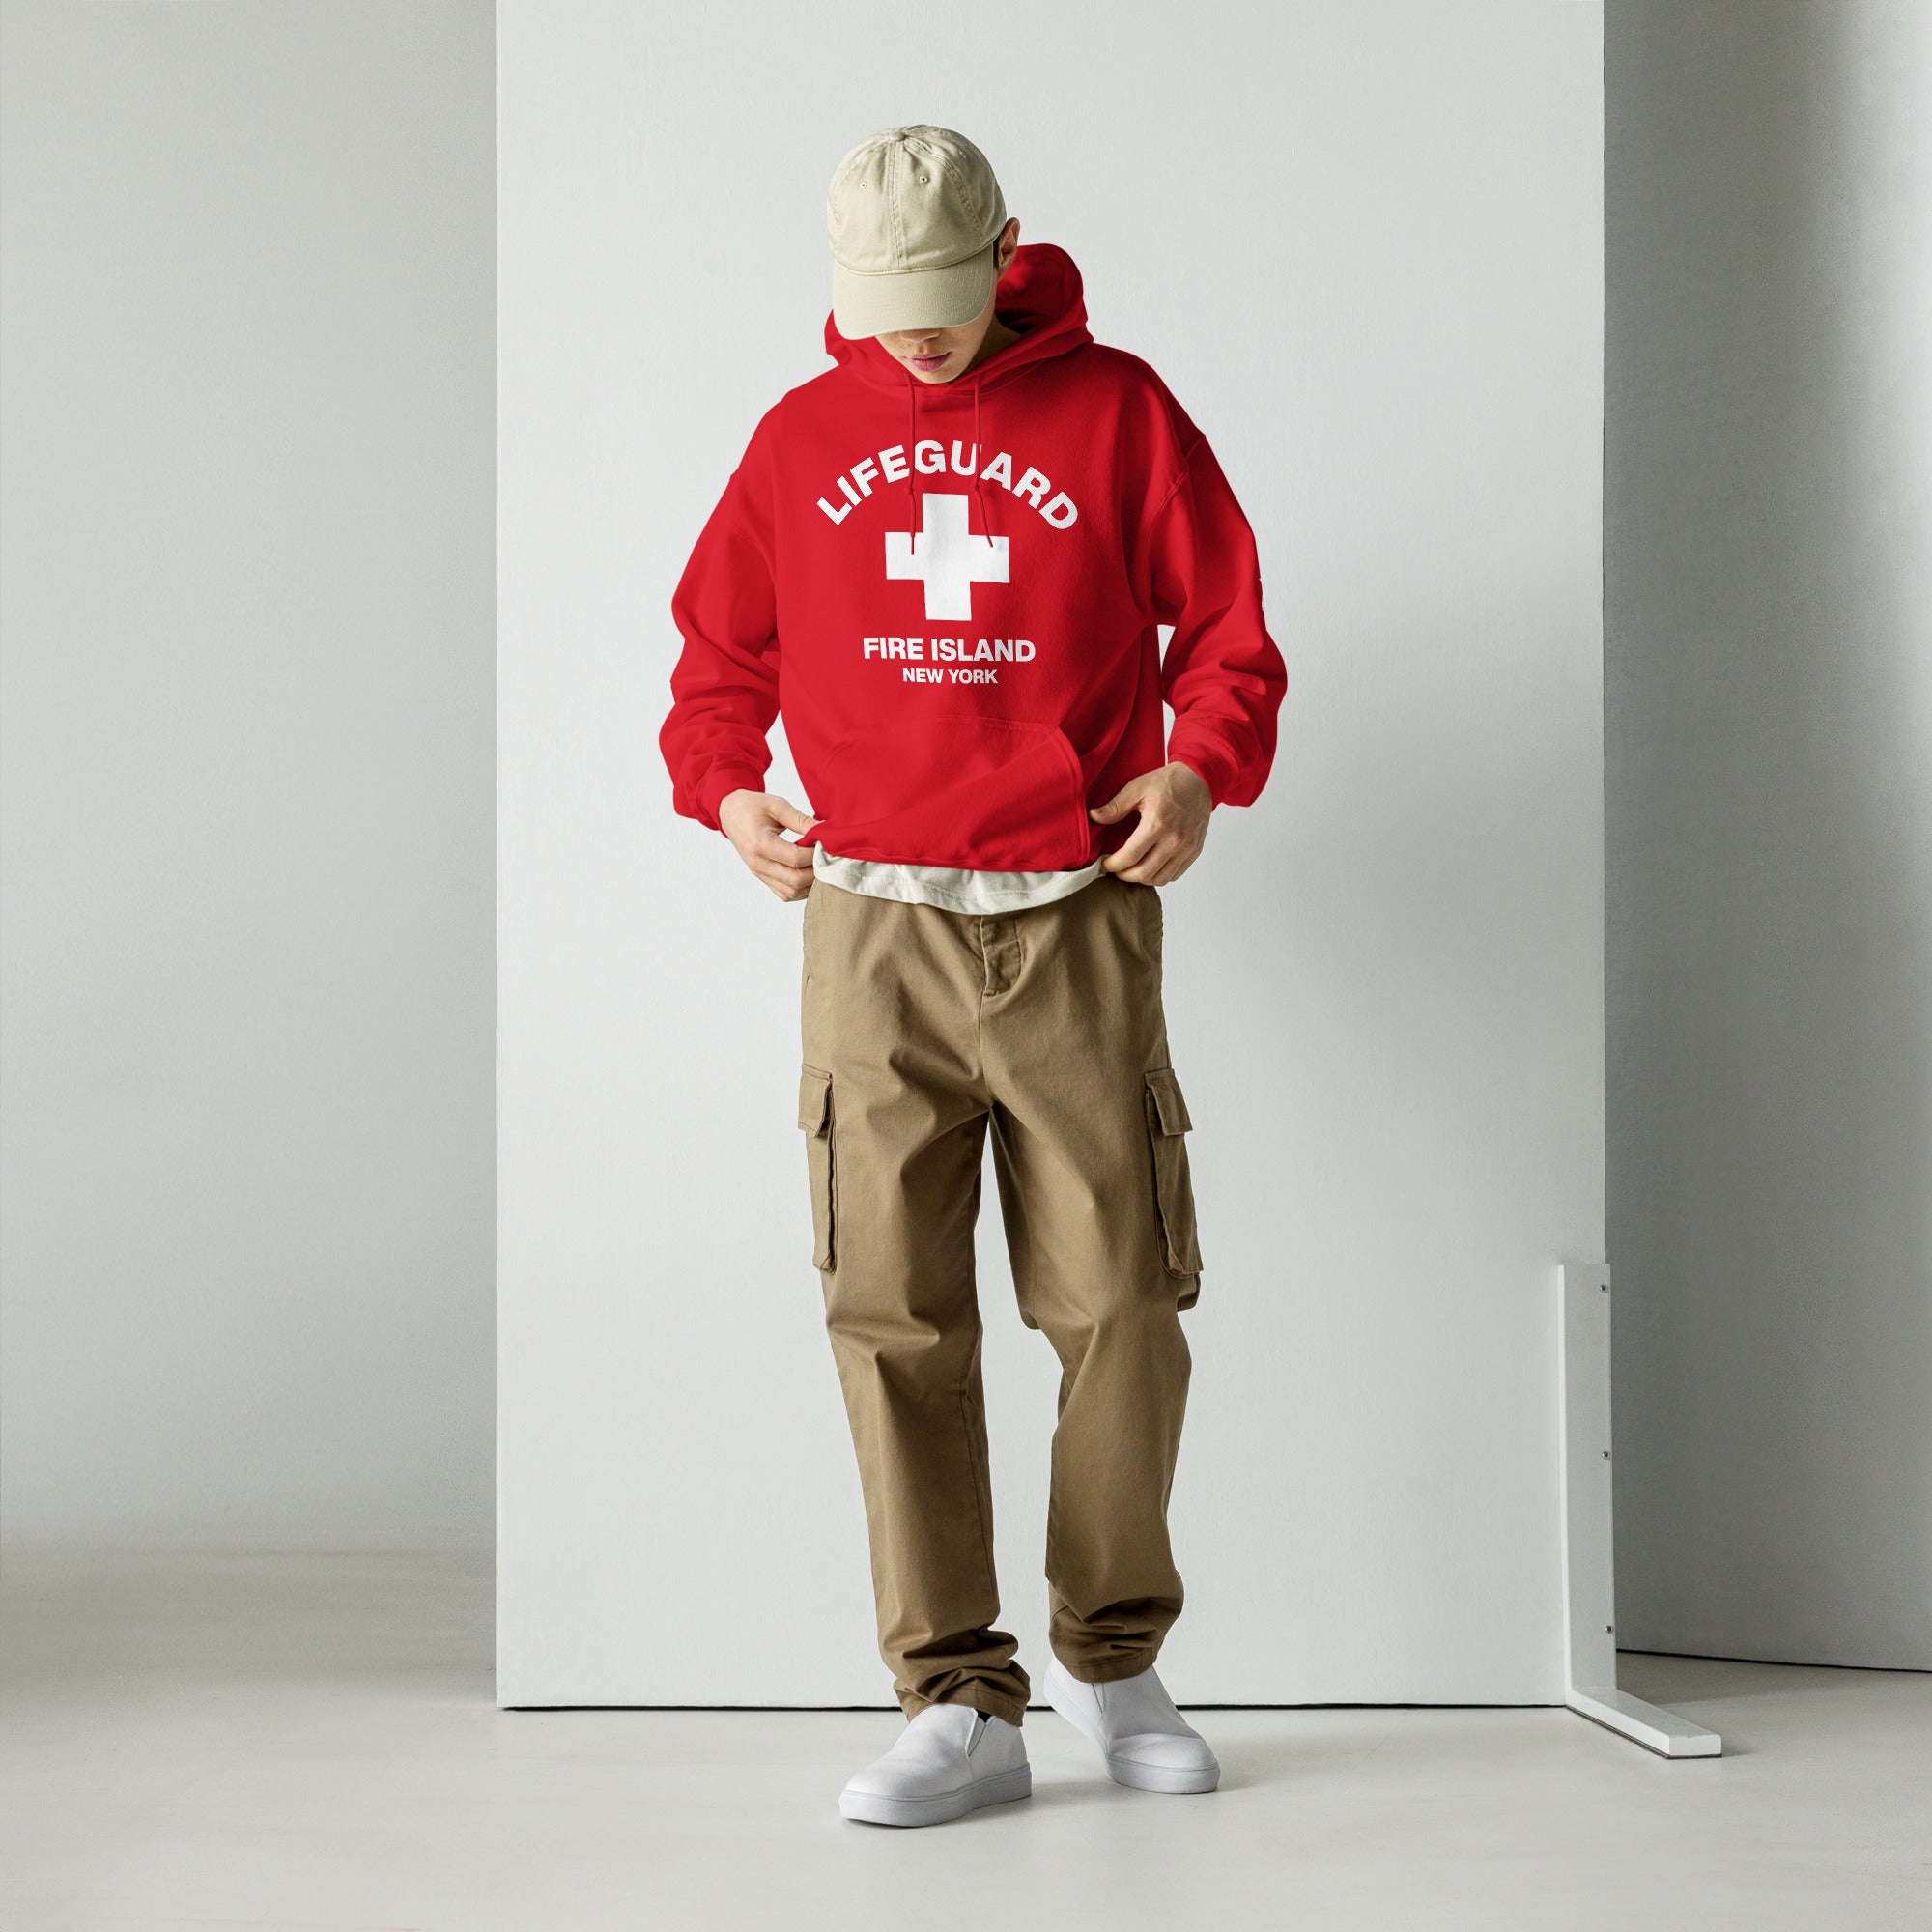 Official New York City Lifeguard Hoodie (5 Sizes) — NYGiftloft